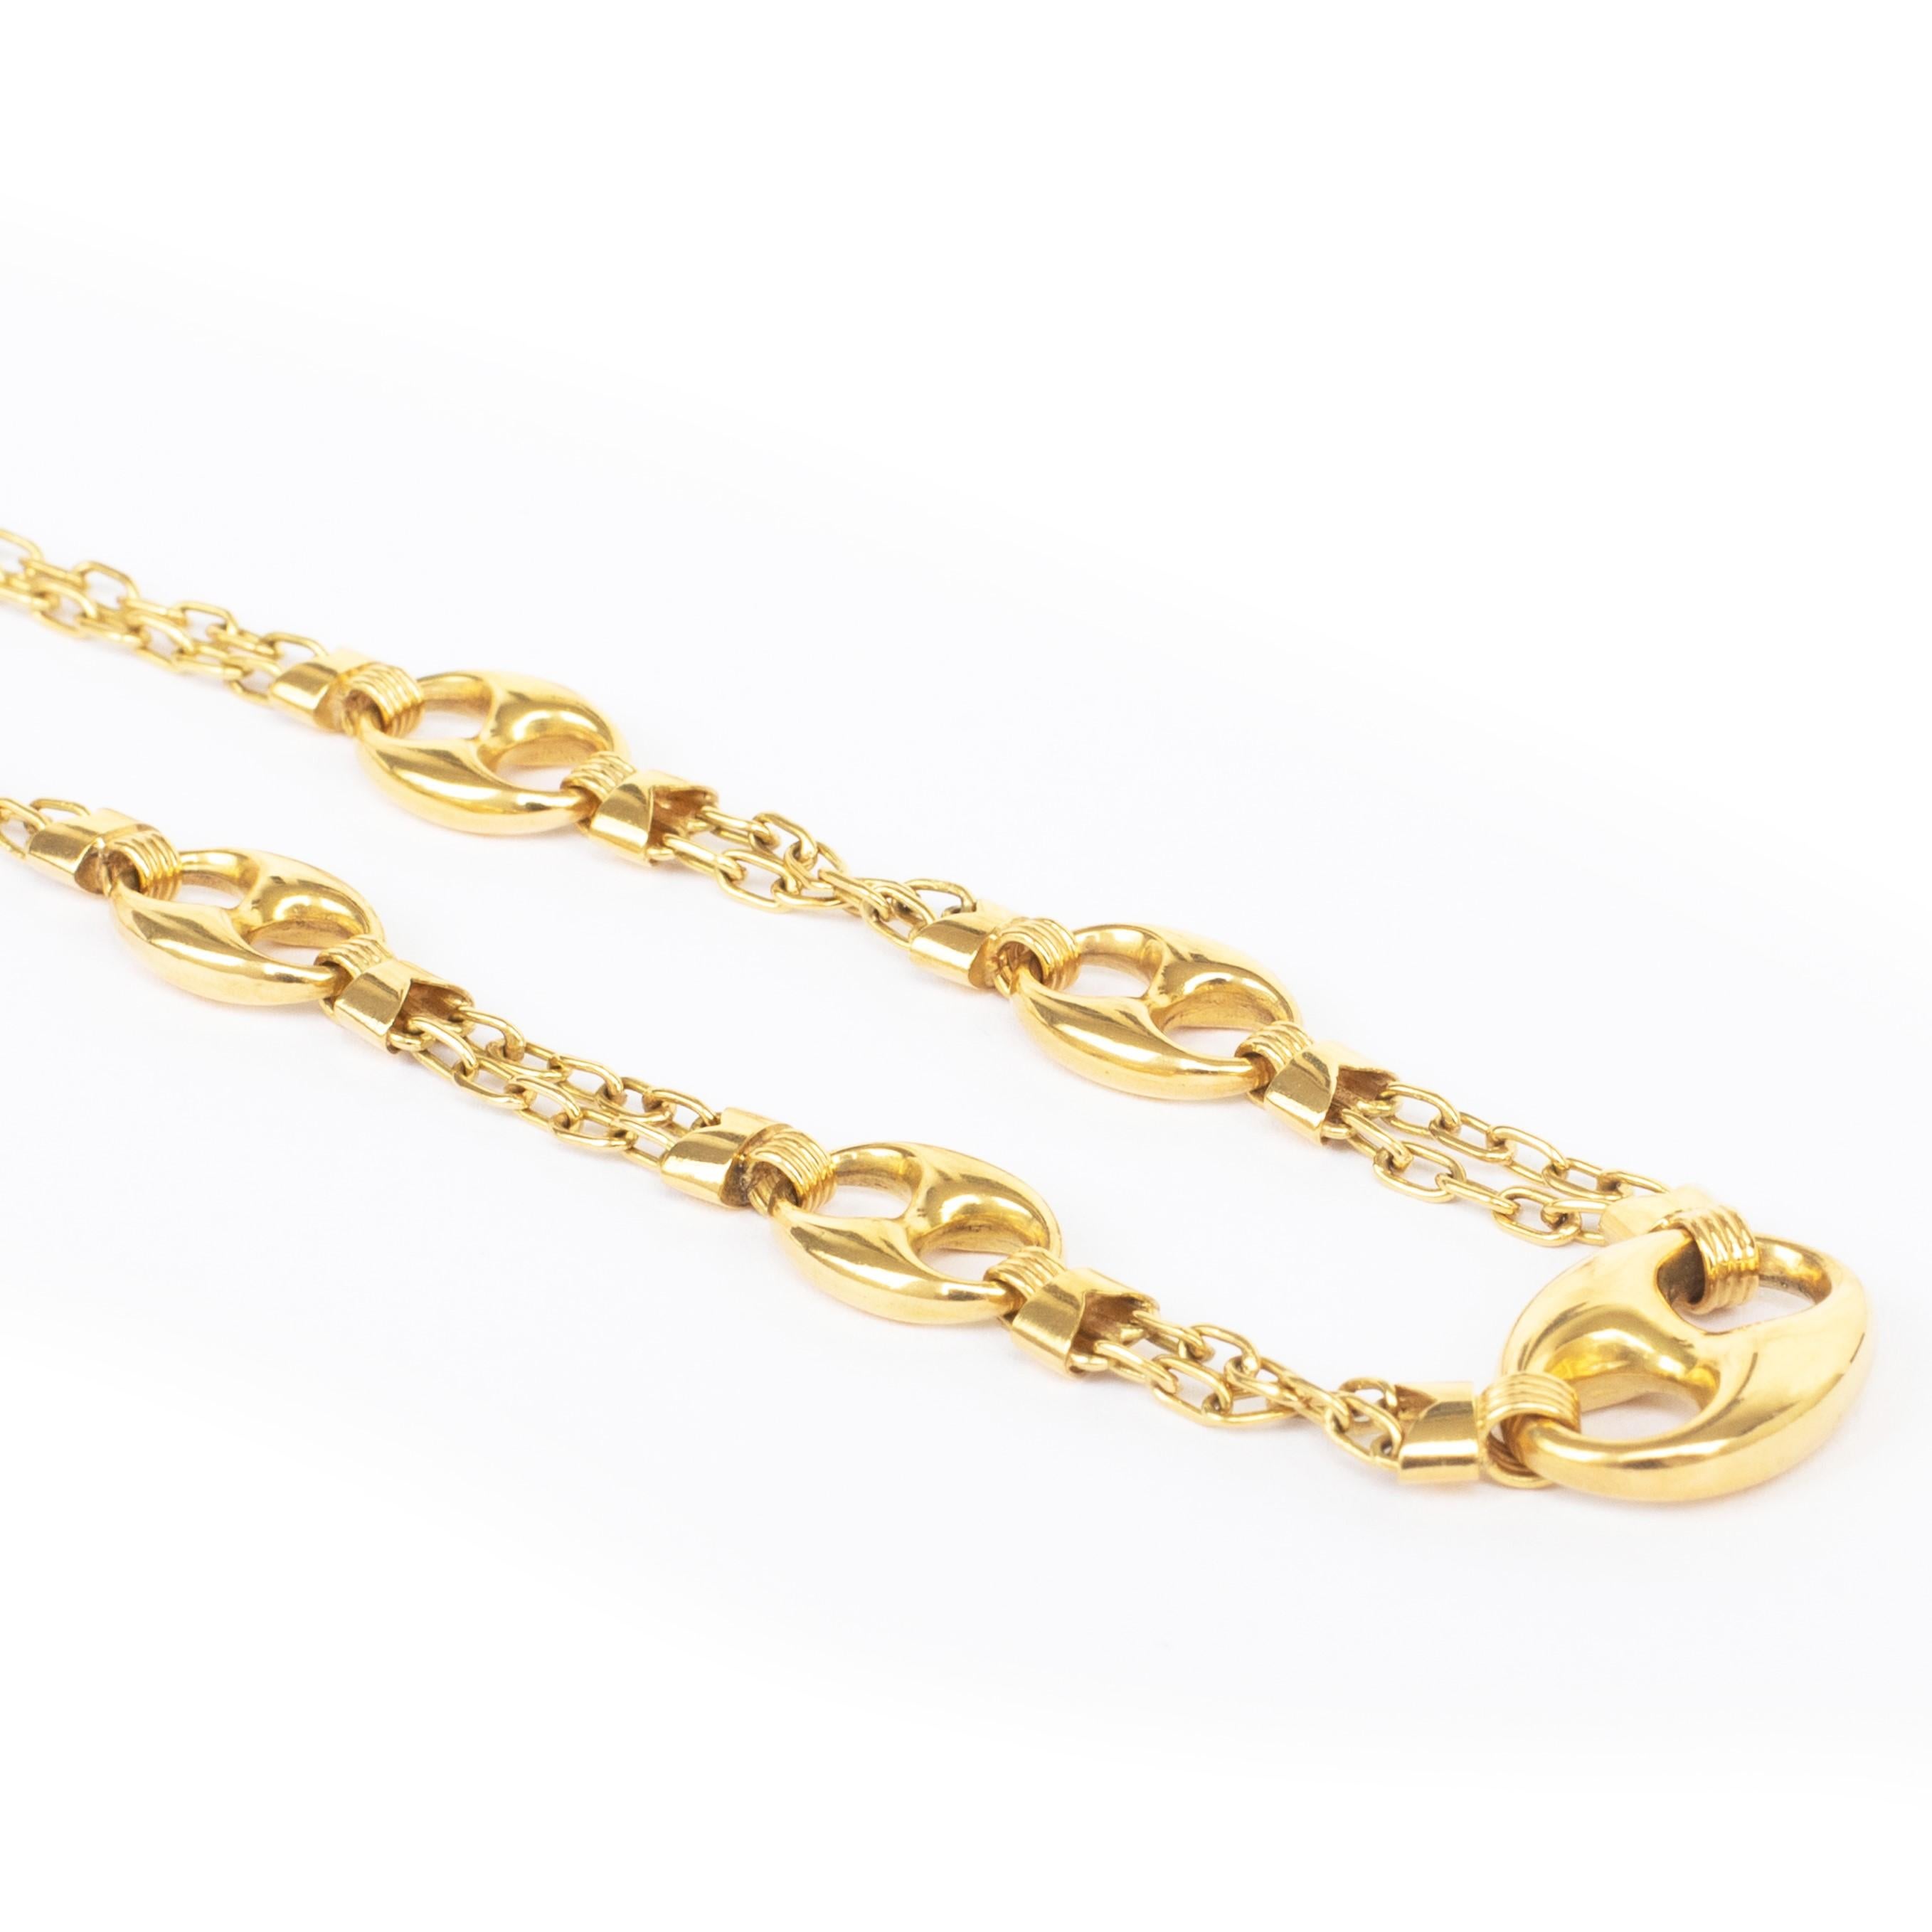 contemporary gold necklace